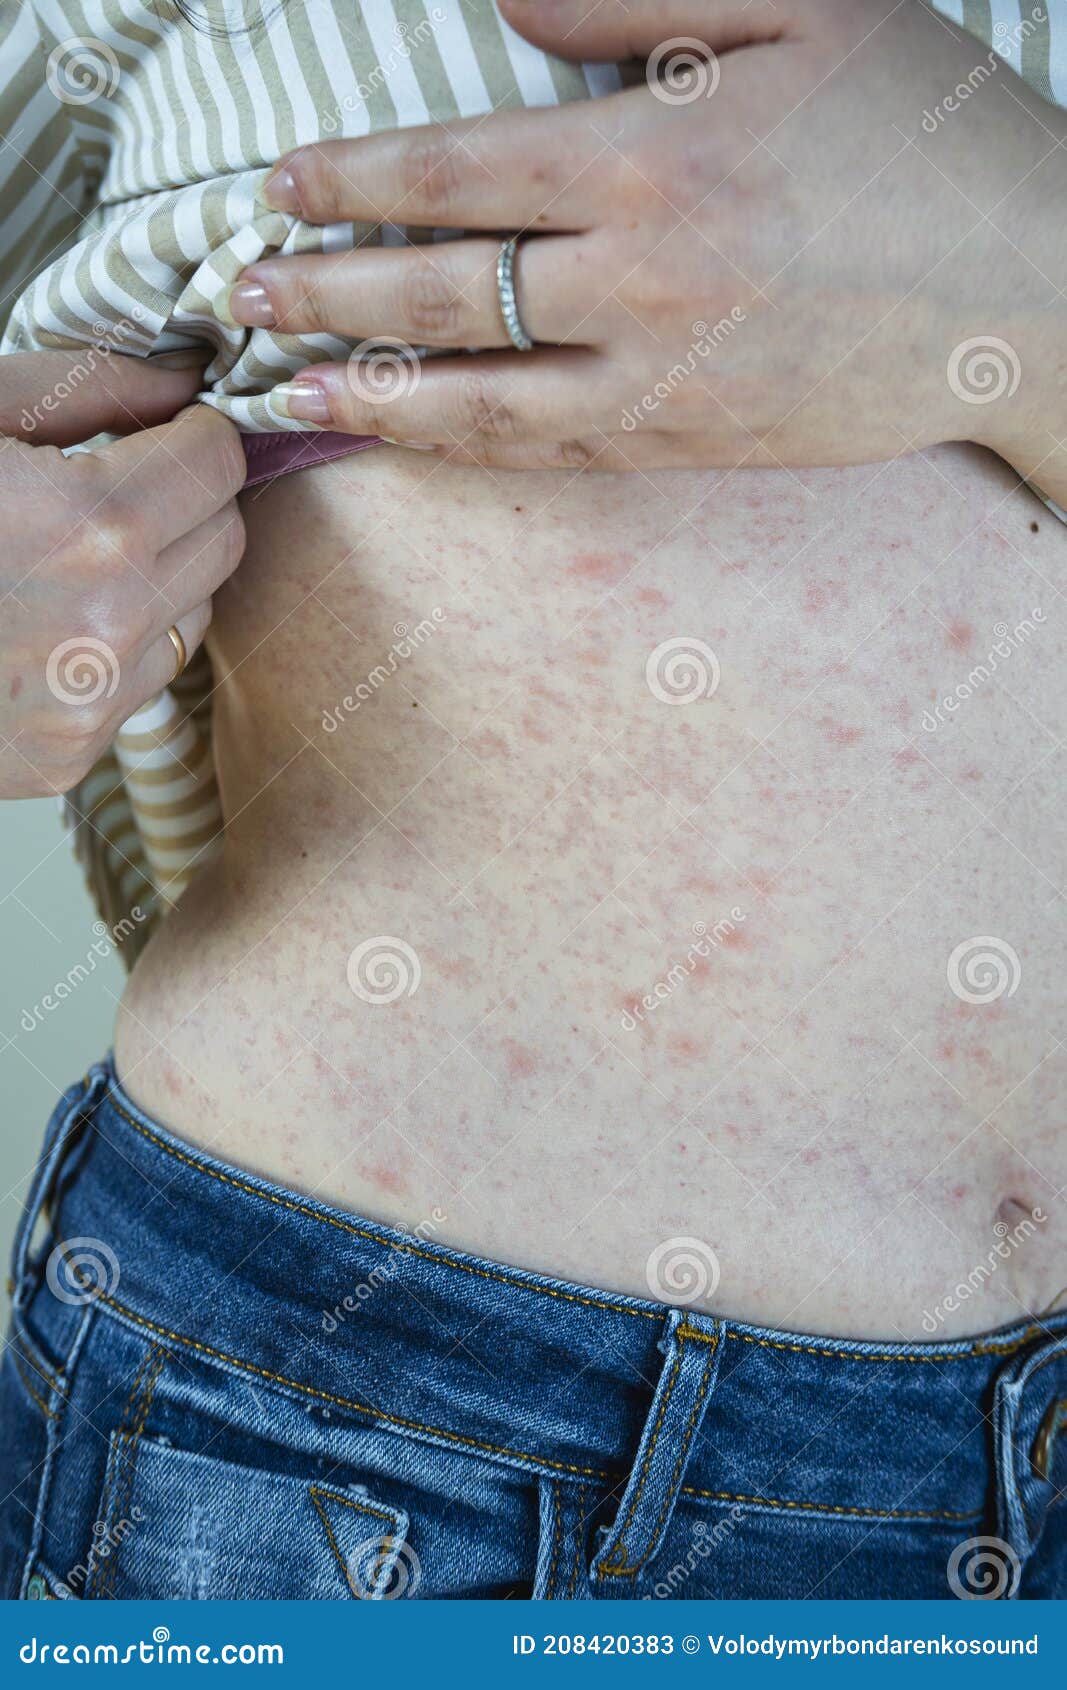 Women With Symptoms Of Itchy Urticaria Or Allergic Reaction On The Skin